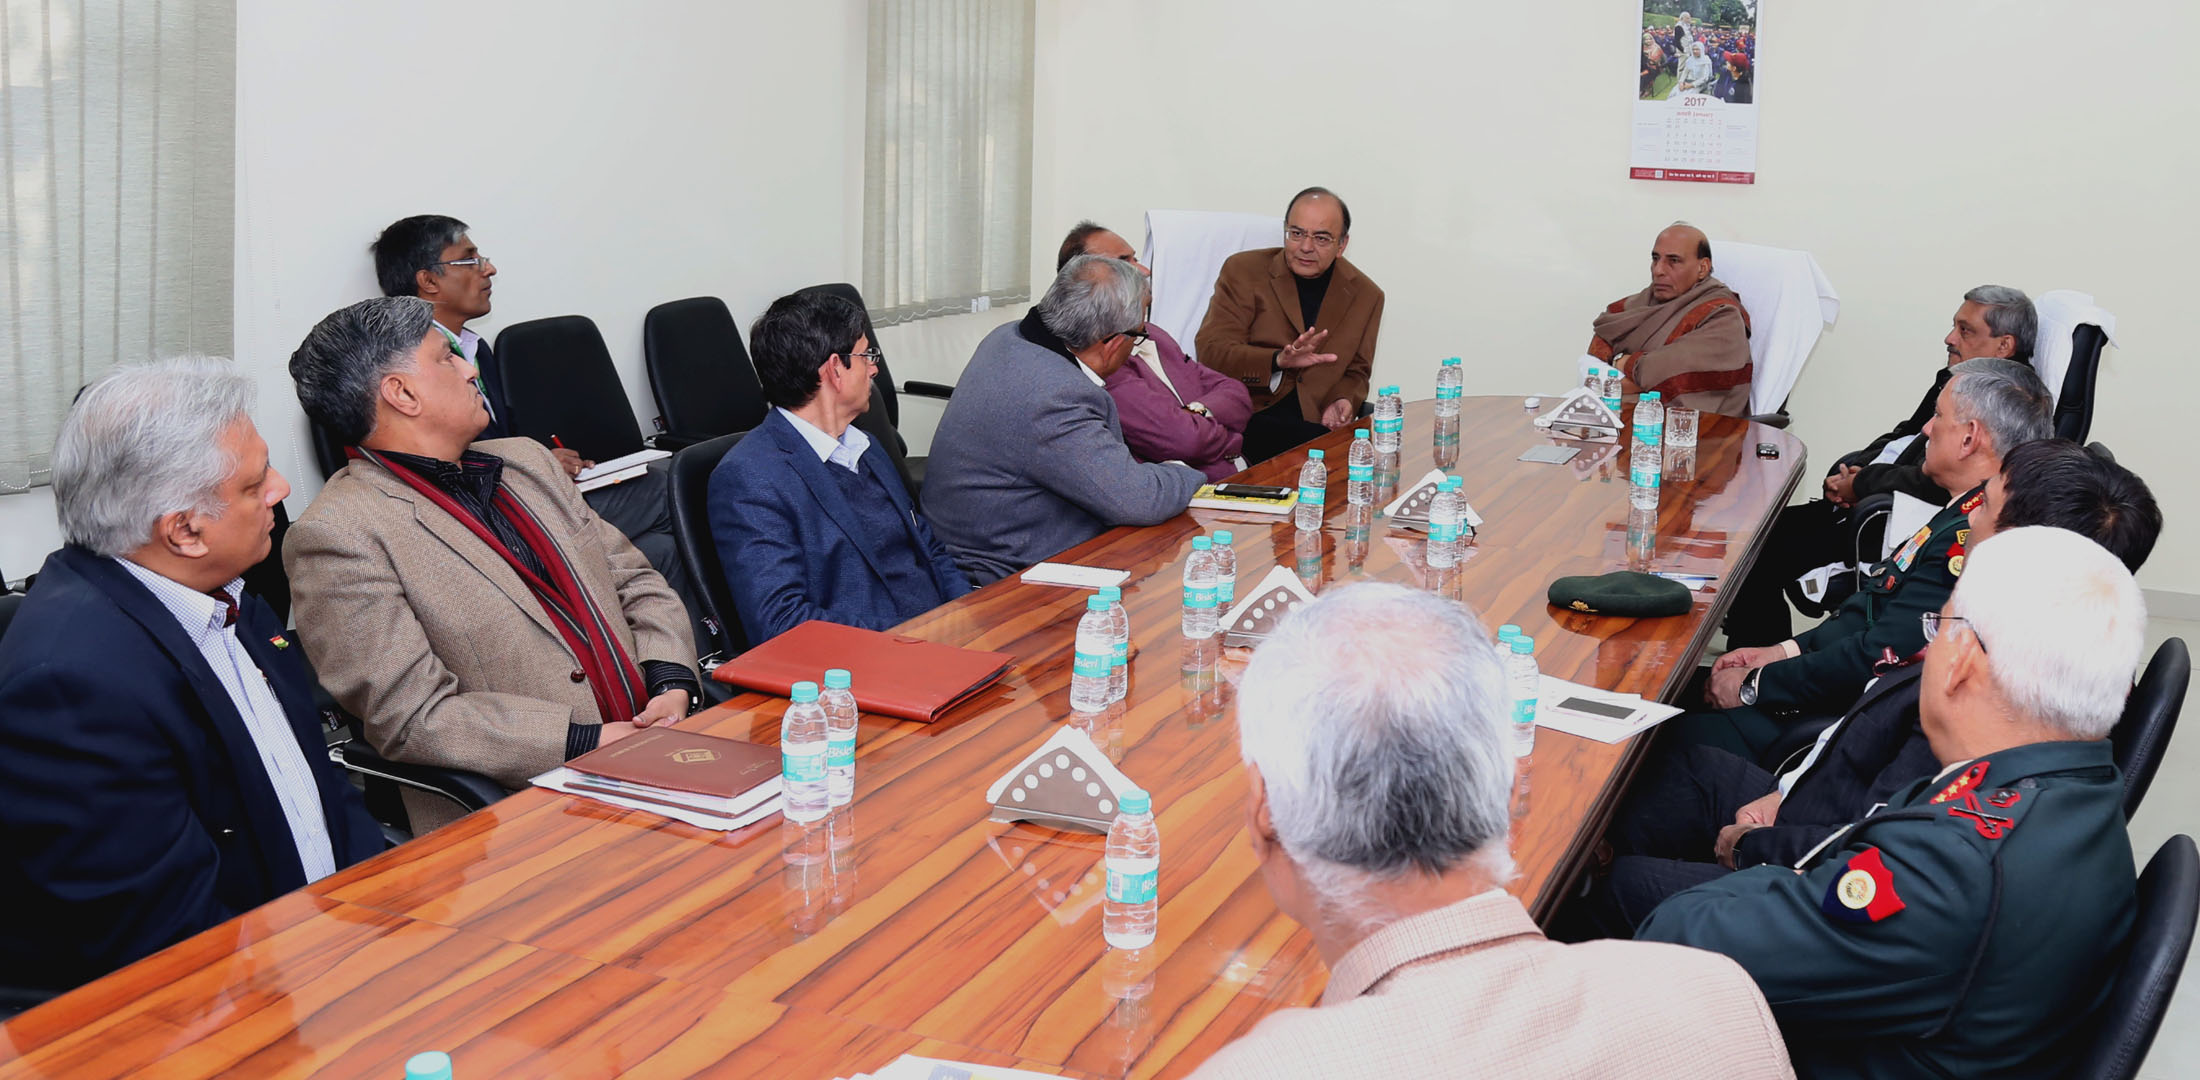 The Union Home Minister, Shri Rajnath Singh chairing the meeting to review the situation in Manipur, in New Delhi on January 15, 2017.  The Union Minister for Finance and Corporate Affairs, Shri Arun Jaitley, the Union Minister for Defence, Shri Manohar Parrikar and other dignitaries are also seen.